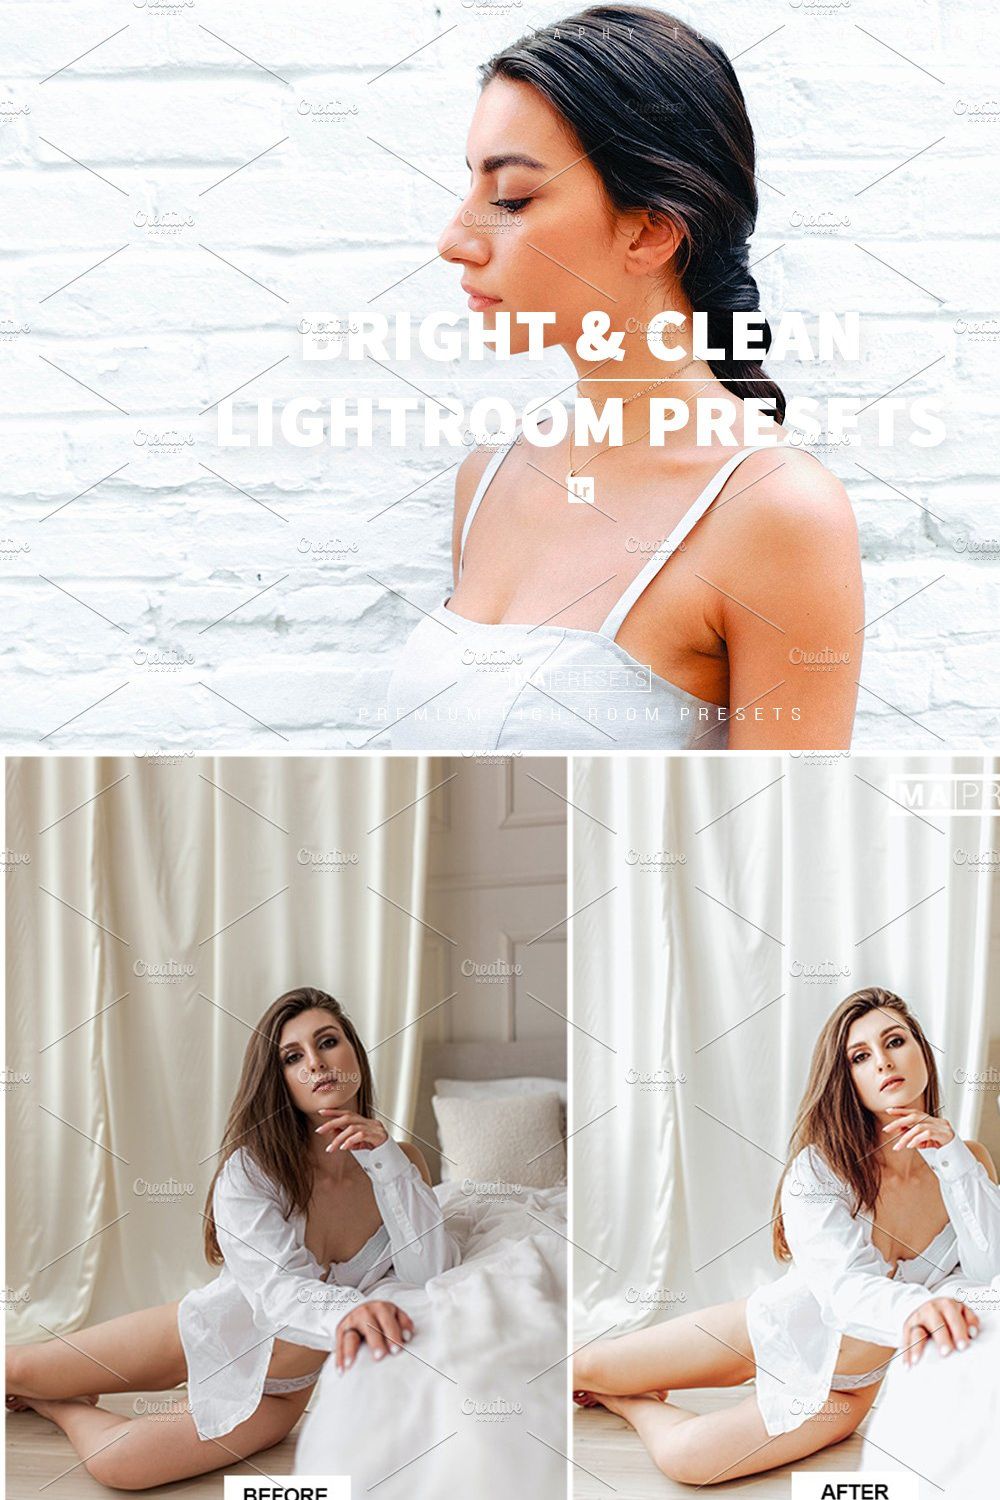 10 BRIGHT & CLEAN Lightroom Presets pinterest preview image.